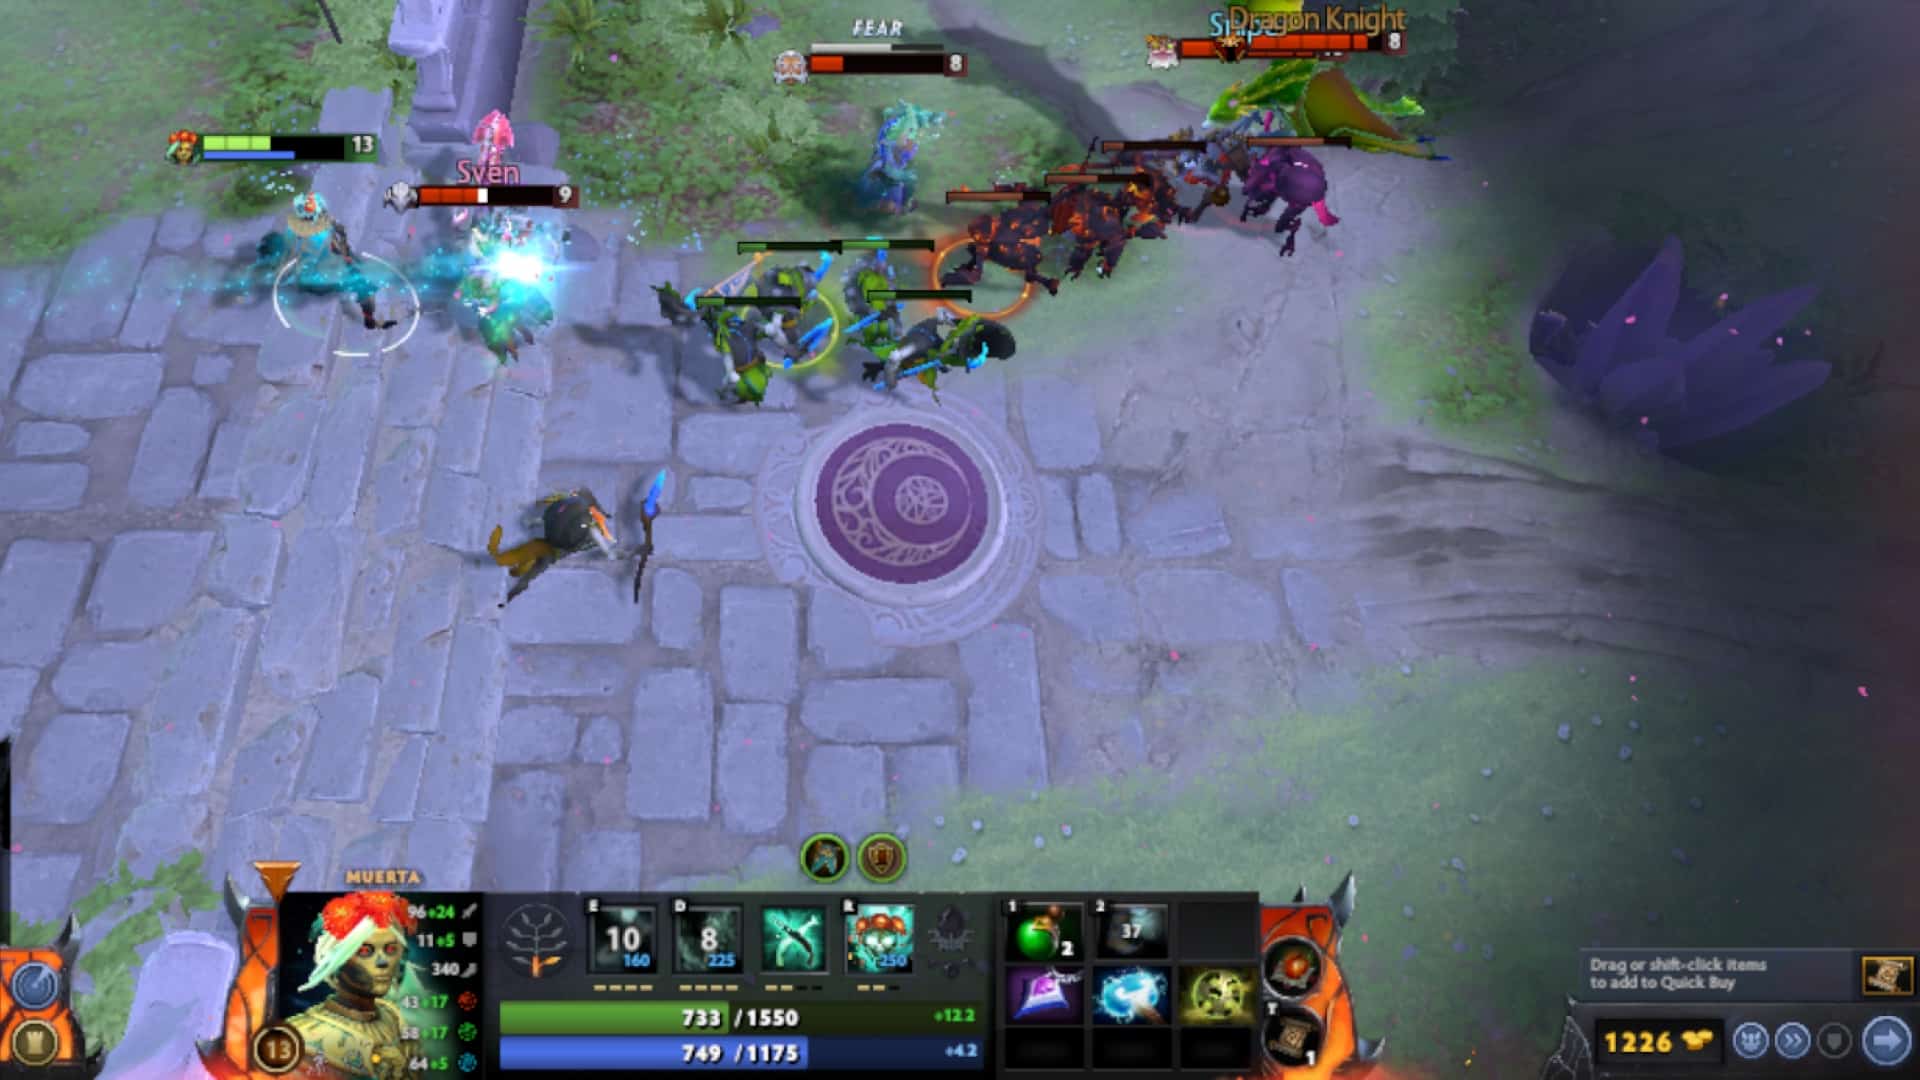 Muerta purchases a Maelstrom to defend her towers in Dota 2